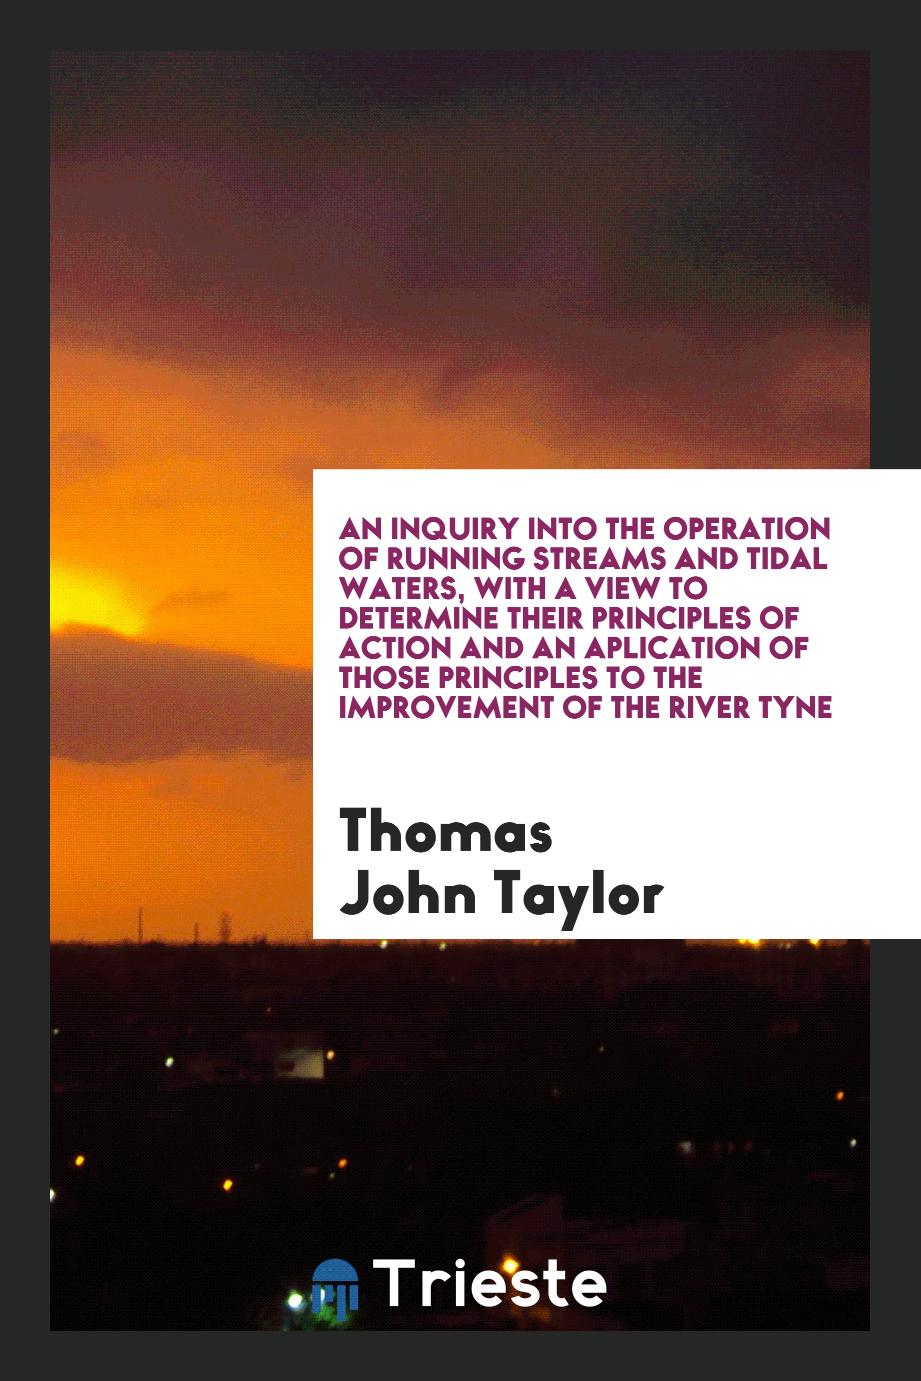 An Inquiry into the Operation of Running Streams and Tidal Waters, with a View to Determine Their Principles of Action and an Aplication of Those Principles to the Improvement of the River Tyne